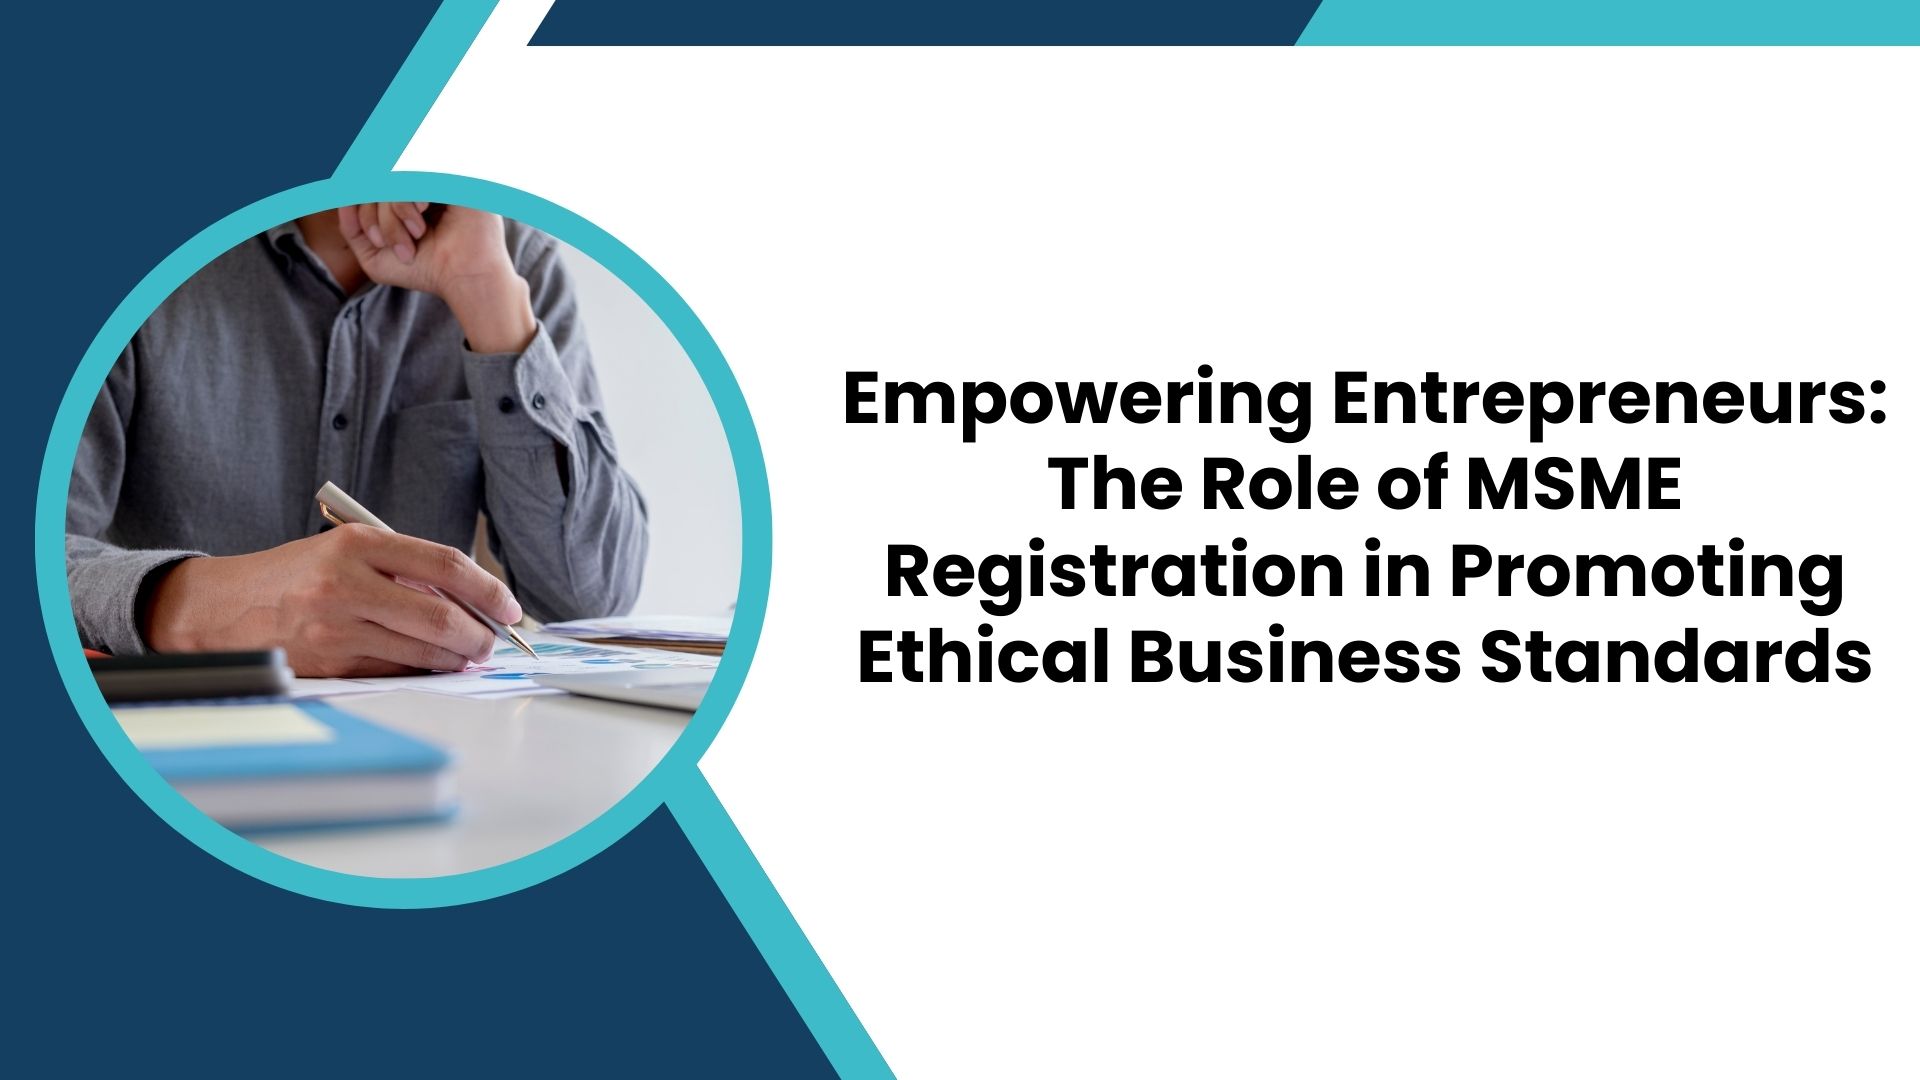 Empowering Entrepreneurs: The Role of MSME Registration in Promoting Ethical Business Standards